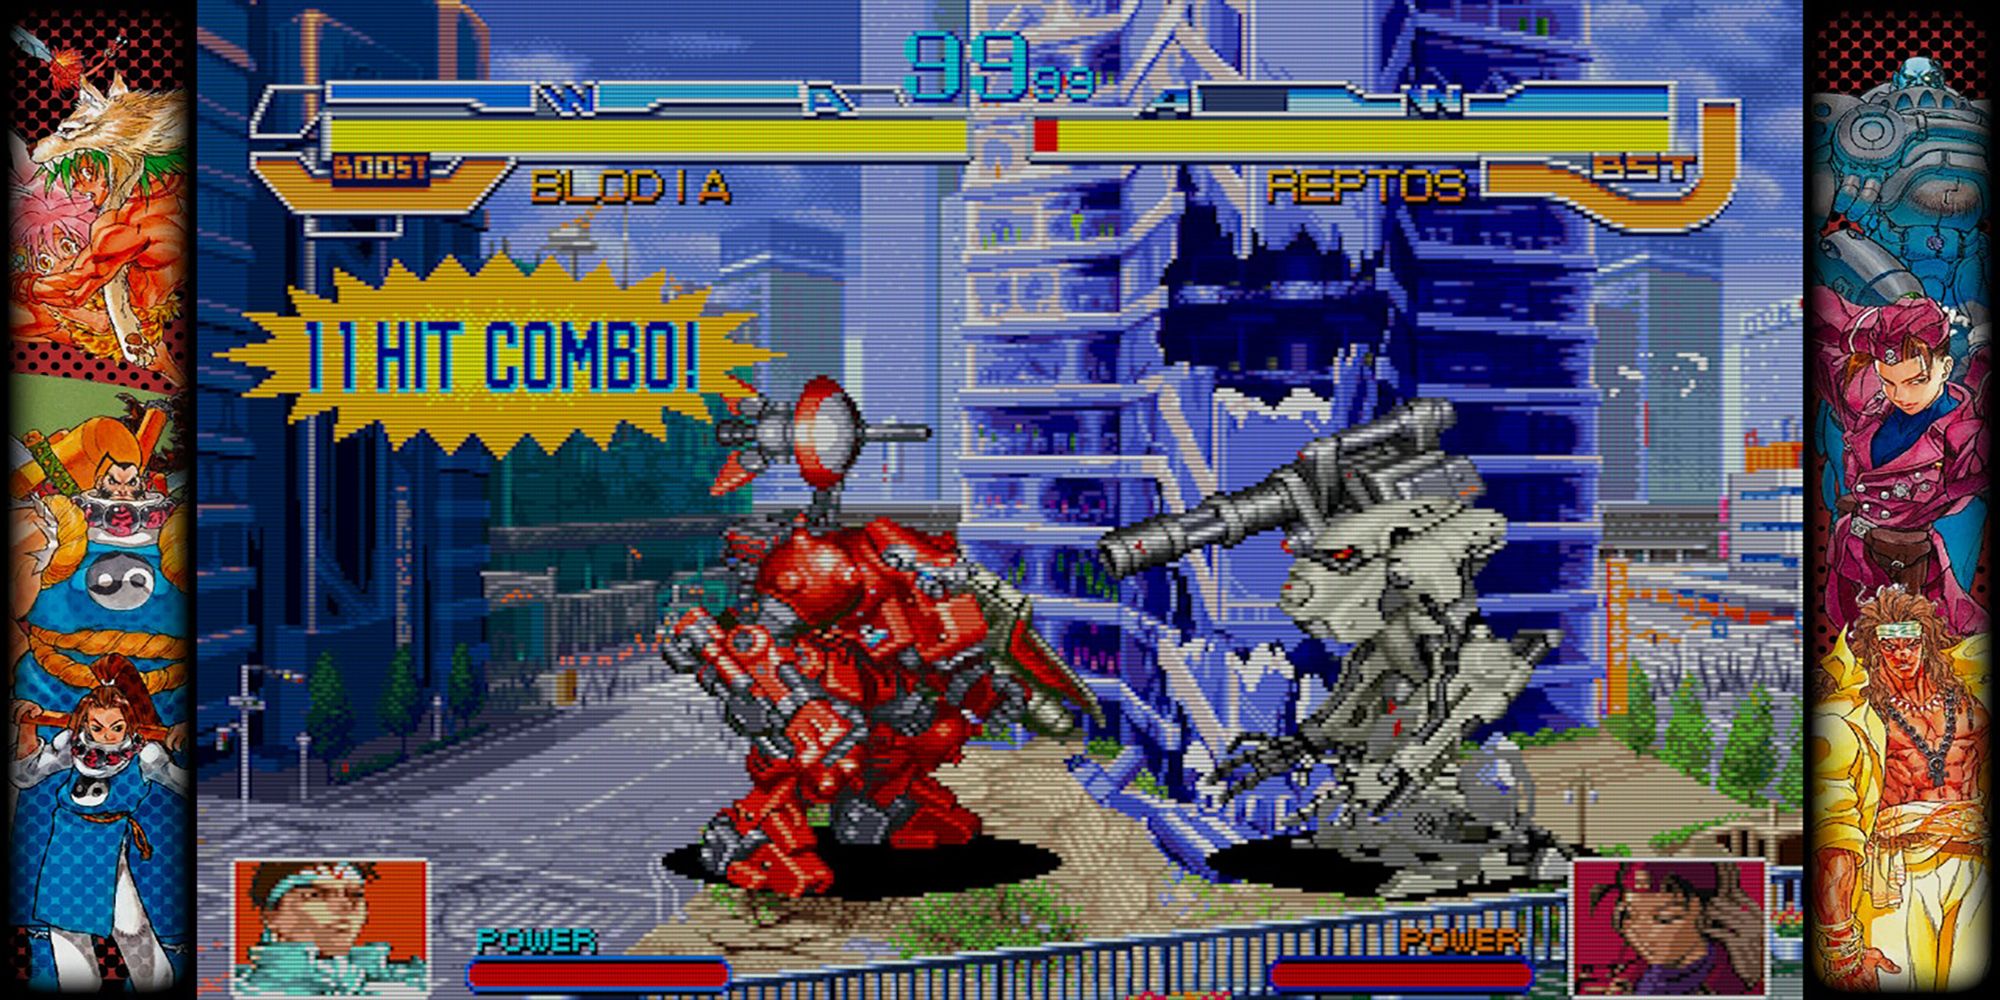 A Megalopolis skyscraper crumbles while two mechs battle in Cyberbots, a game in Capcom Fighting Collection.